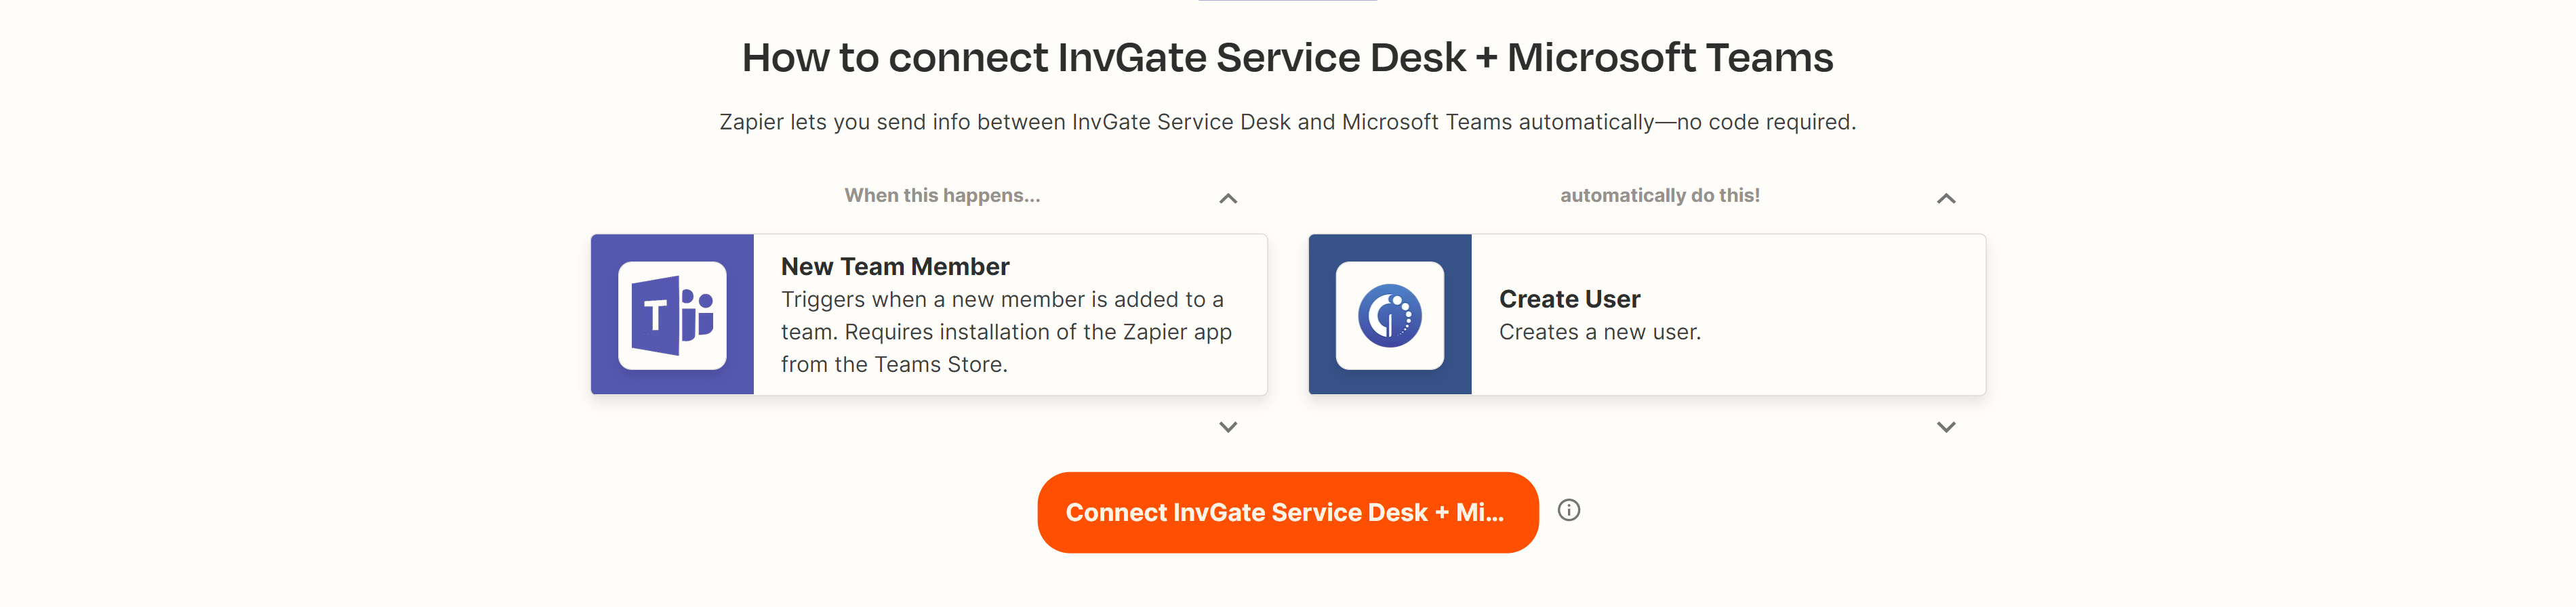 Integrate Microsoft Teams into InvGate Service Desk using Zapier to create a new Service Desk user when someone is added to a Teams channel.